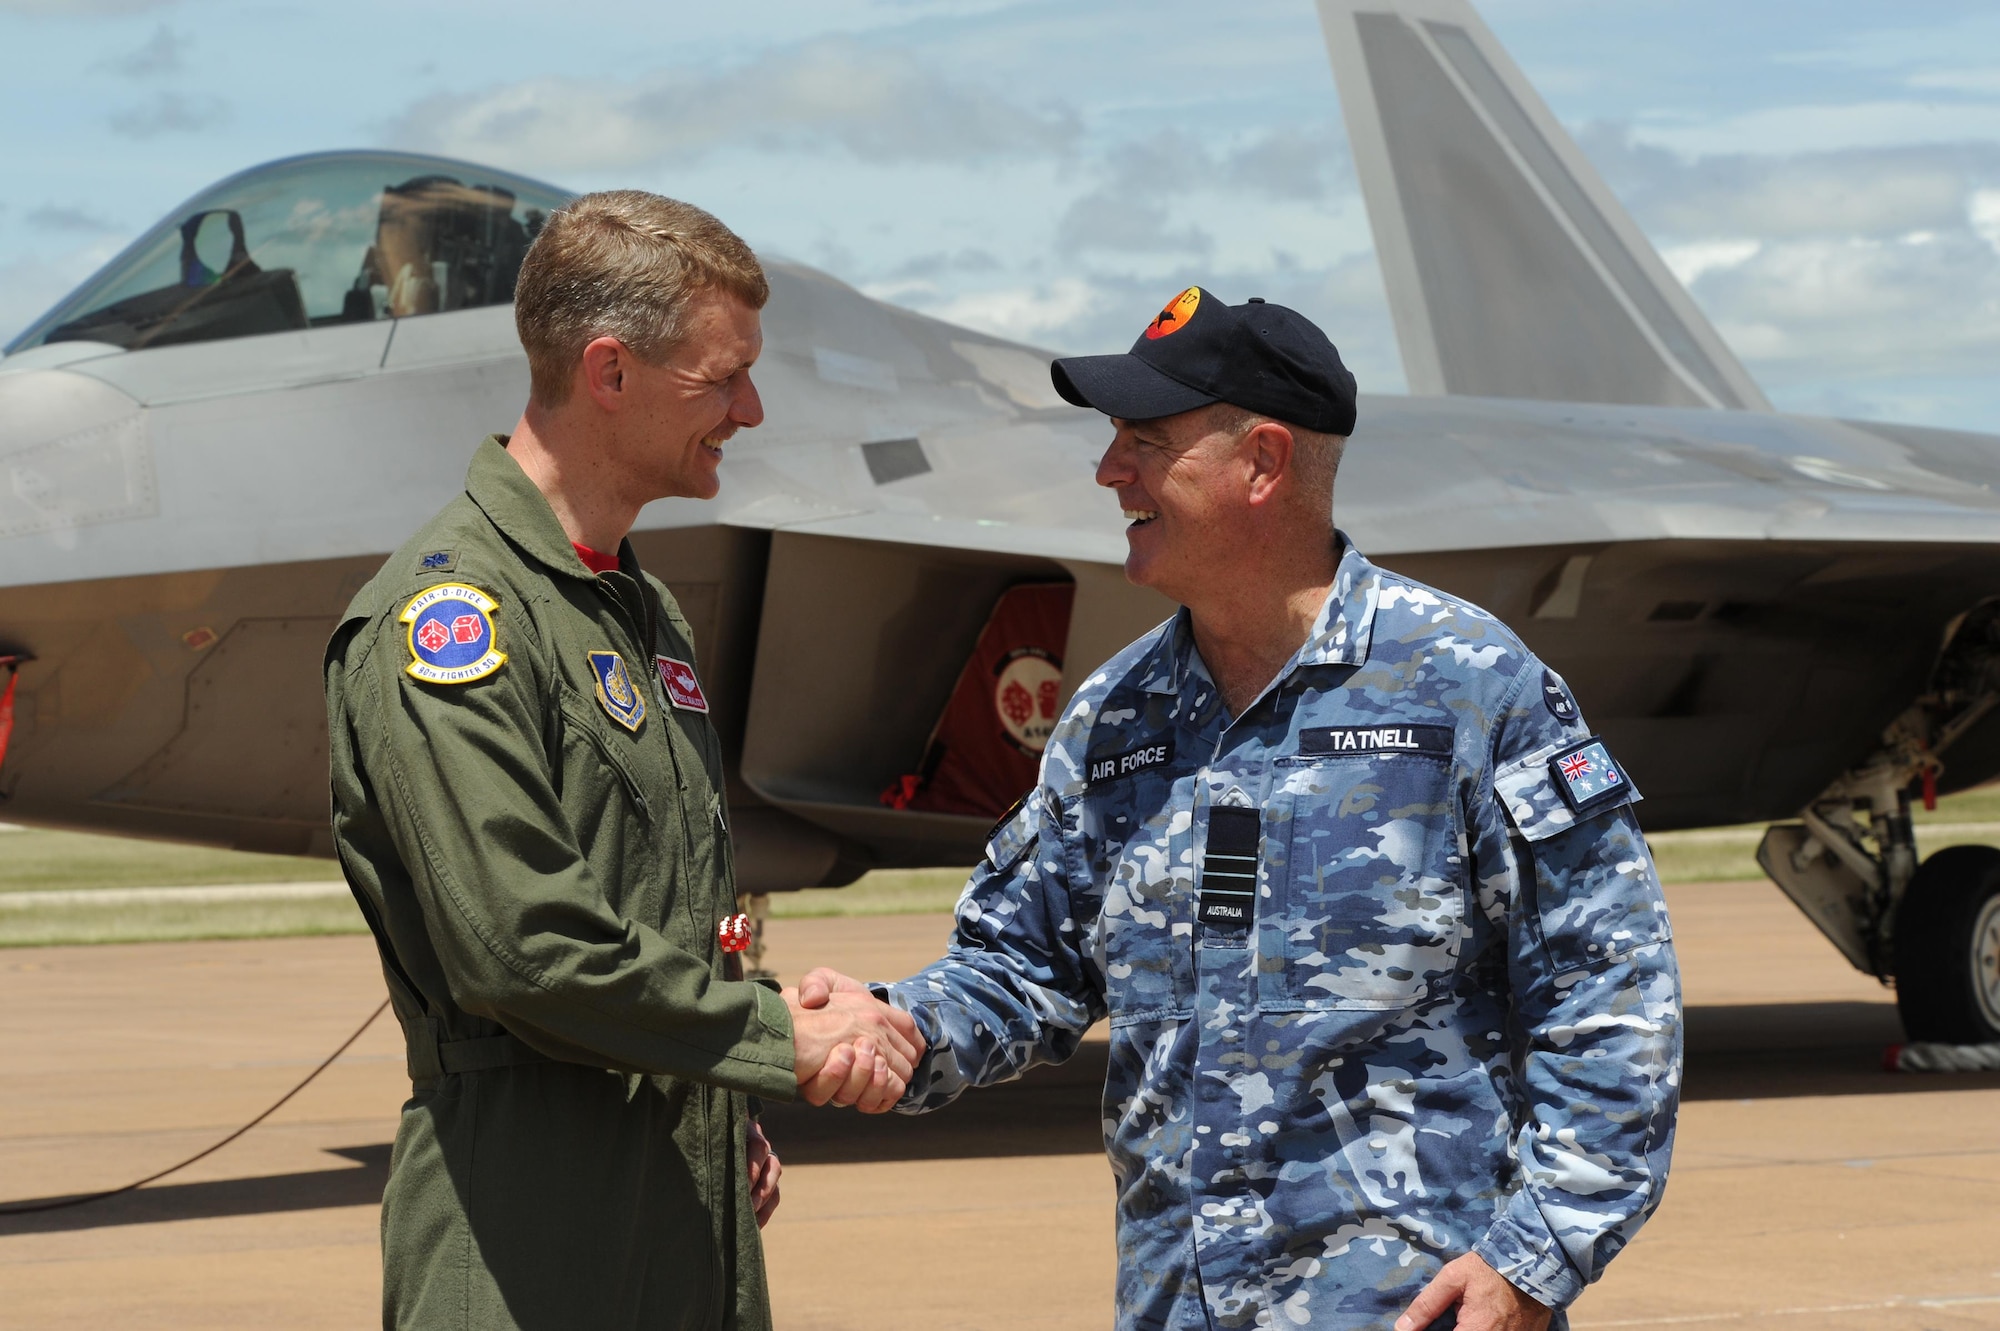 U.S. Air Force Lt. Col. David Skalicky, 90th Fighter Squadron commander, and Wing Commander Andrew Tatnell, Royal Australian Air Force Base Tindal Senior Australian Defence Force Officer, shake hands in front of a U.S. F-22 Raptor at RAAF Base Tindal, Australia, Feb. 24, 2017. Twelve F-22 Raptors and approximately 200 U.S. Air Force Airmen are in Australia as part of the Enhanced Air Cooperation, an initiative under the Force Posture Agreement between the U.S. and Australia. (U.S. Air Force photo by Staff Sgt. Alexander Martinez)